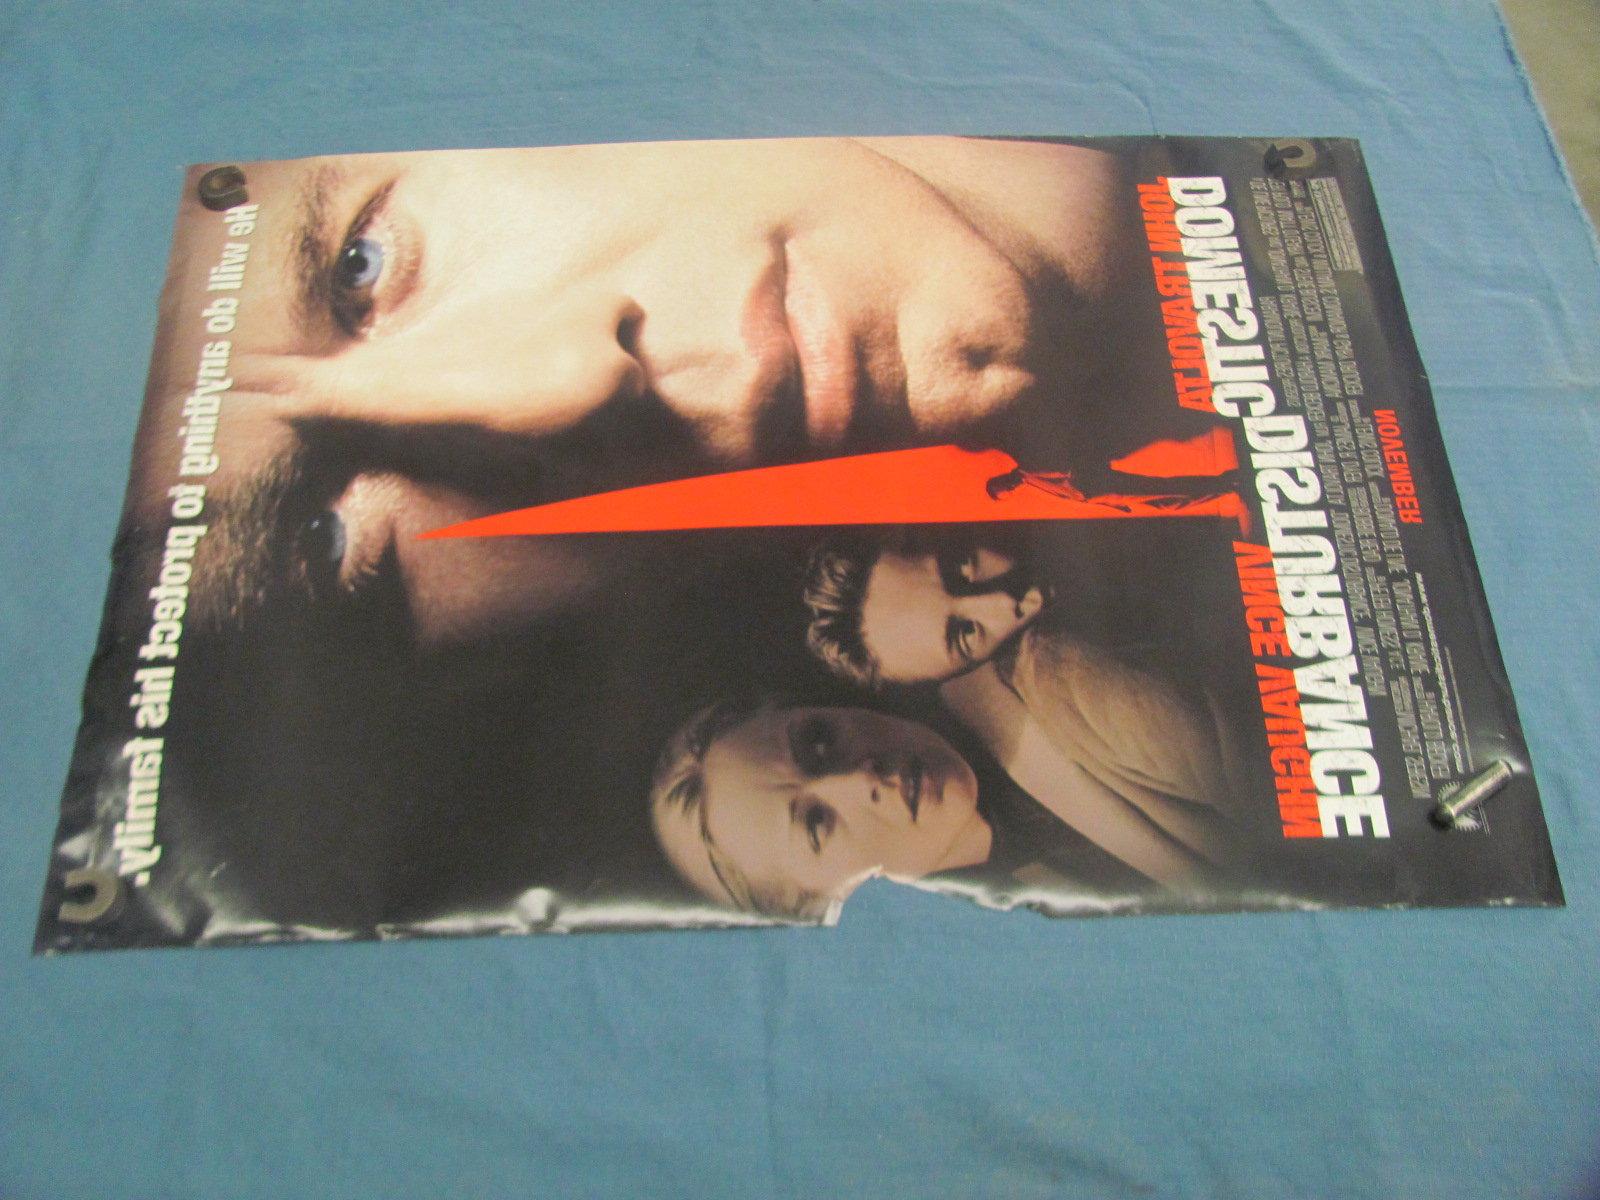 2001 Domestic Disturbance Movie Poster – Two Sided – 27” x 40” - Damaged